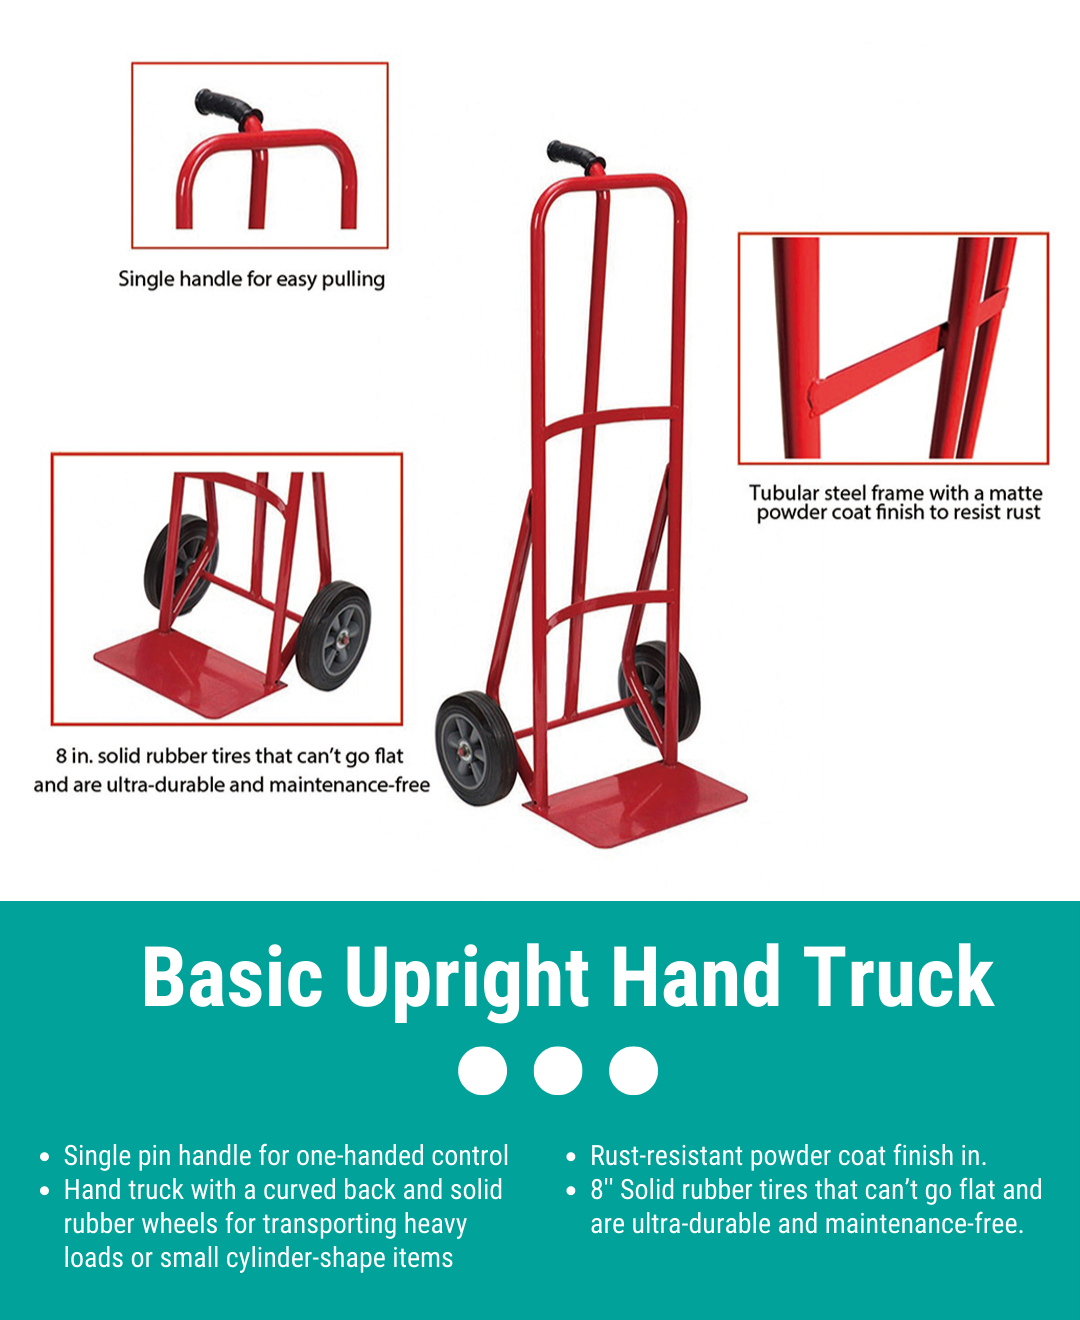 Single grip A basic upright hand truck with no folding or convertible function, resulting in a very low price